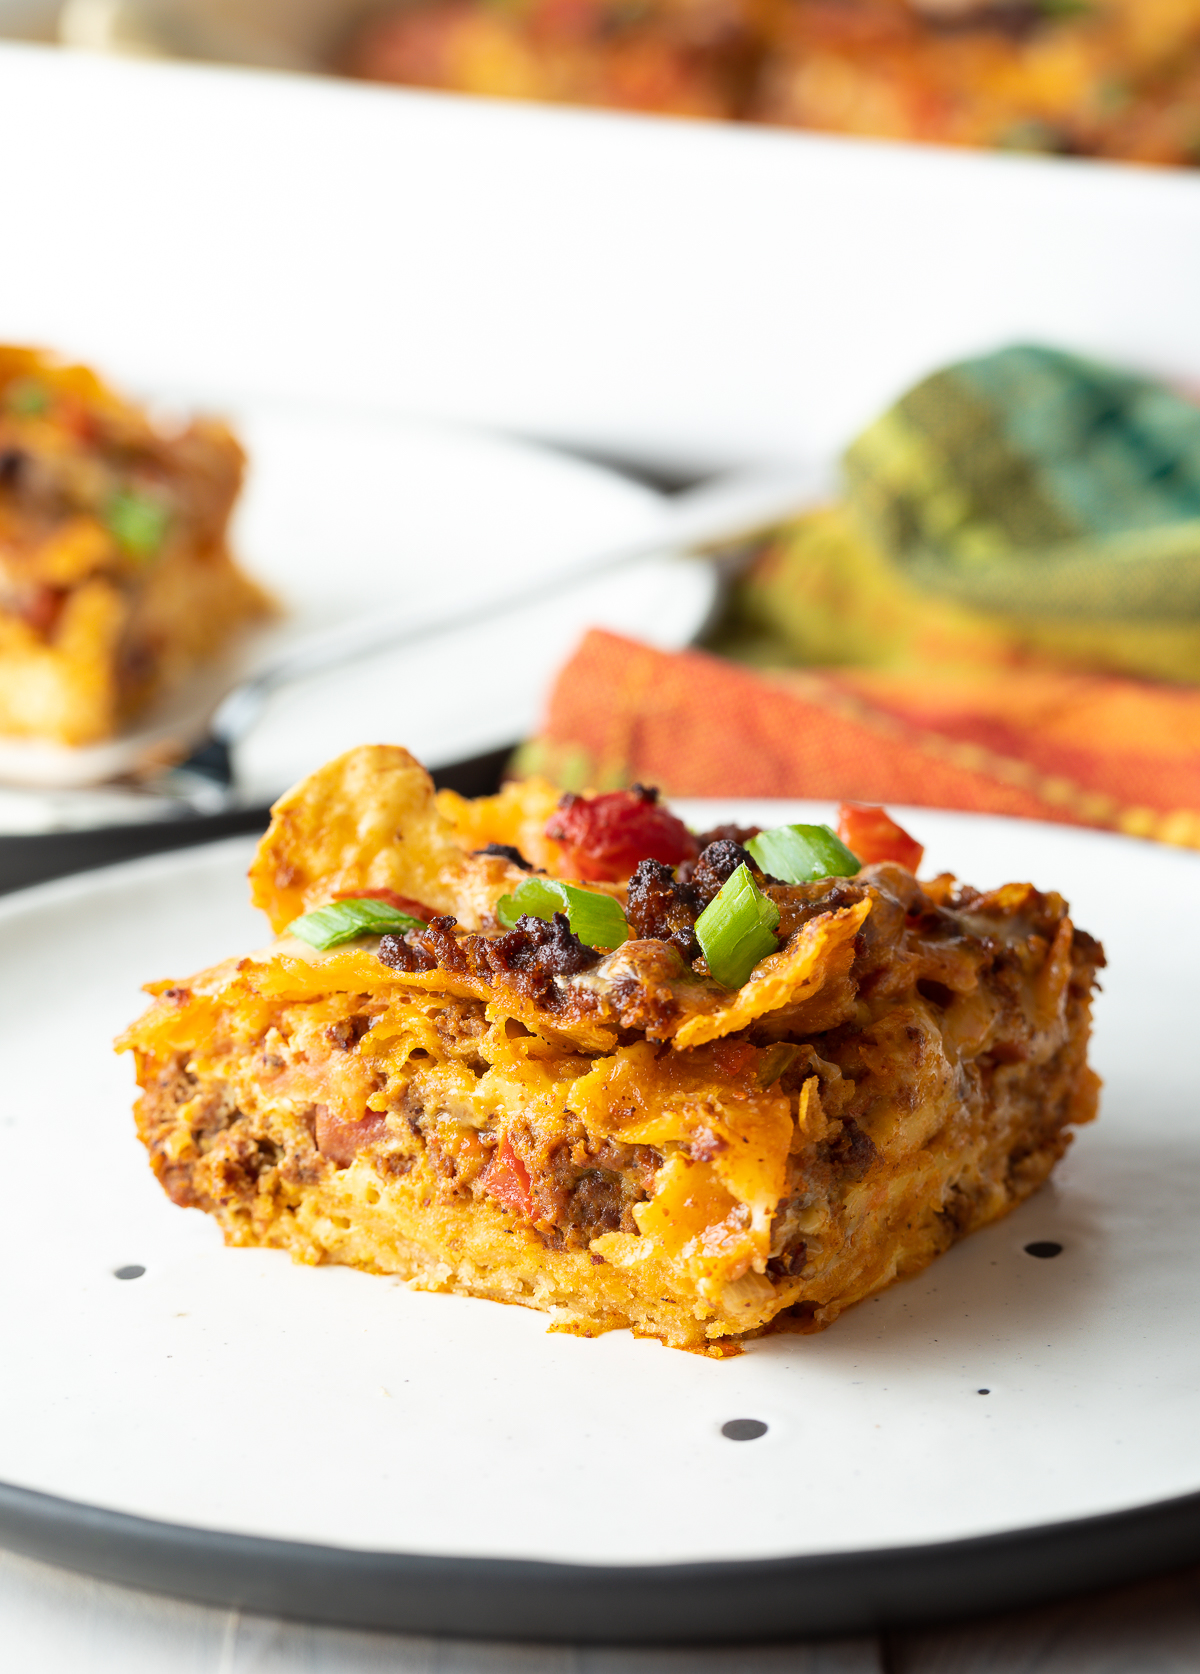 eggs, veggies, and cheese, you’ll love the zesty Mexican flavors in this gl...